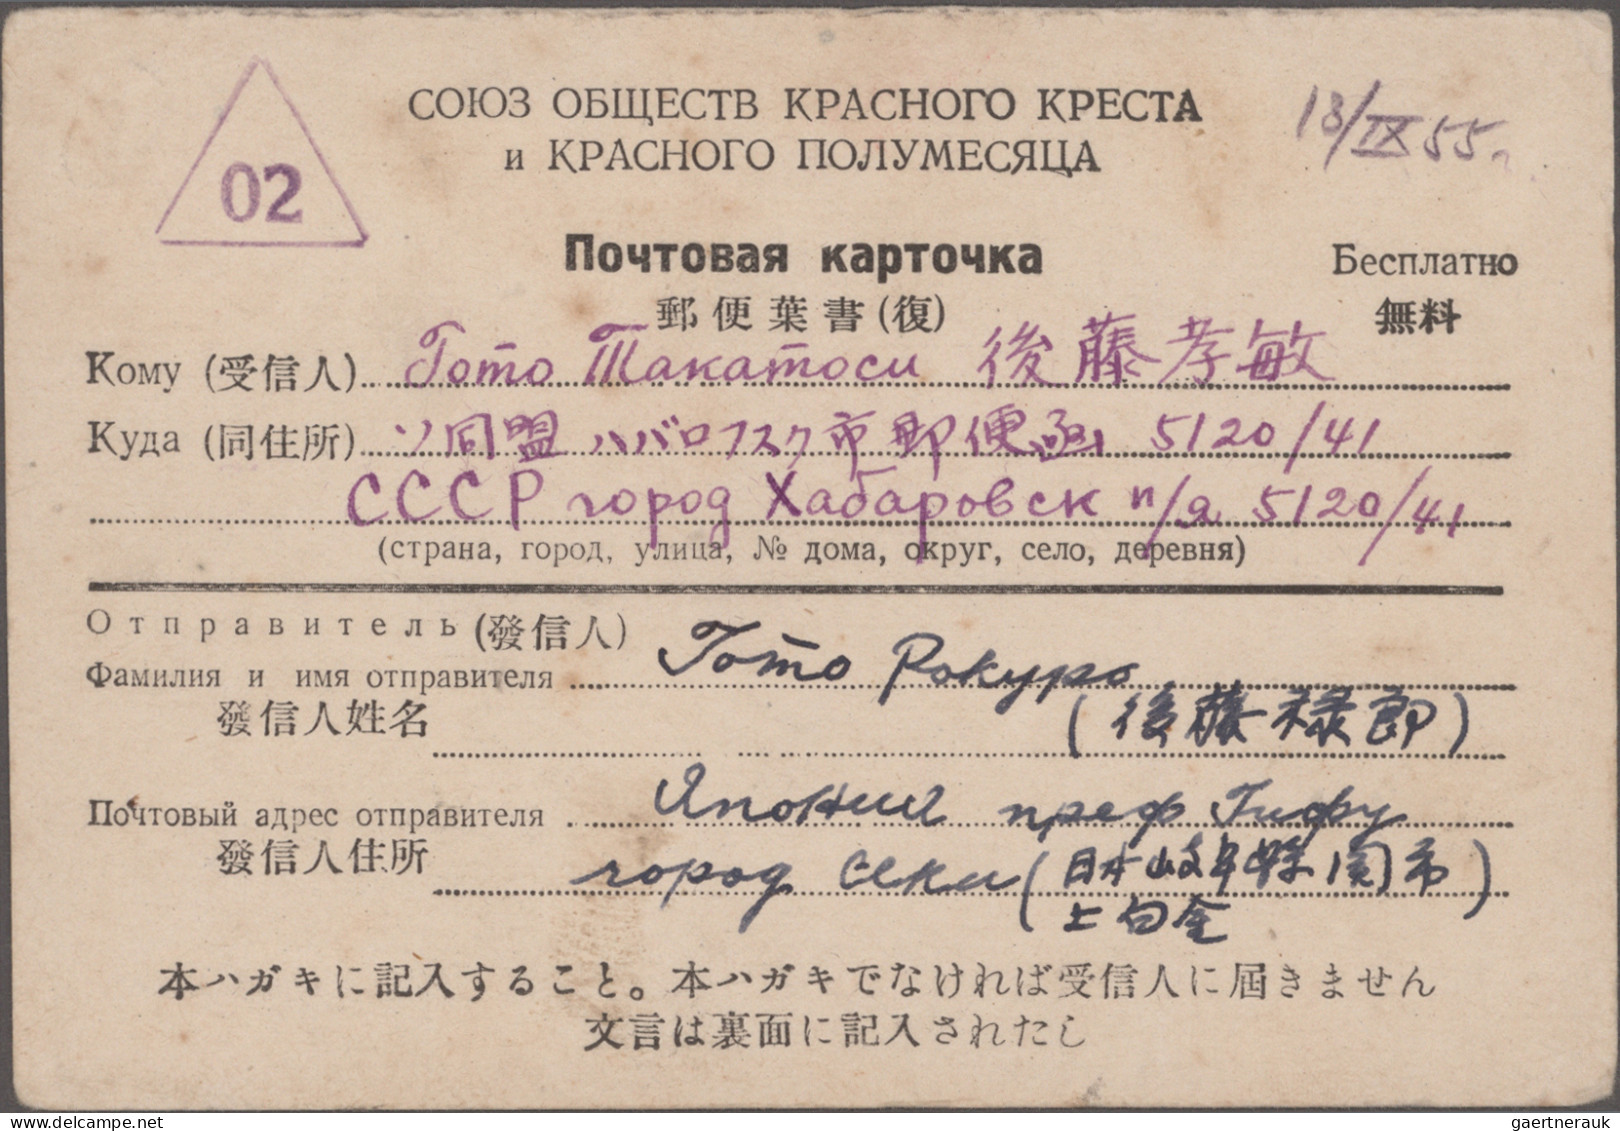 Japan: 1947/1956, Japanese POW in USSR (Russia), preprinted POW cards (5, inc. o